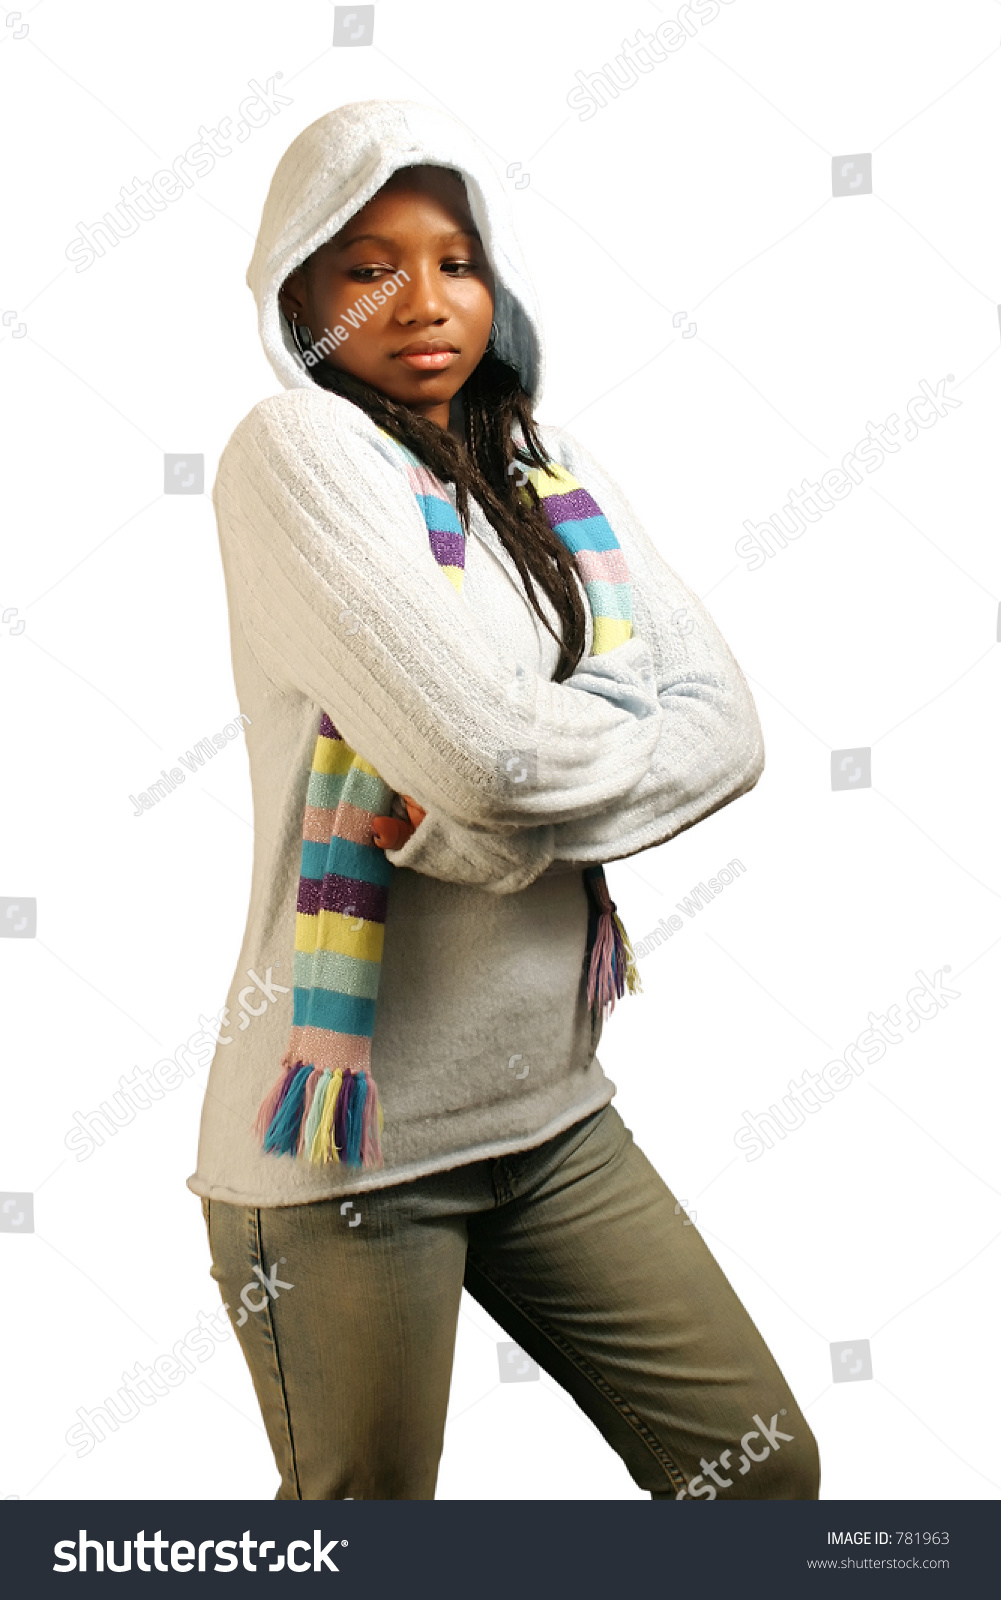 An Aloof Teenage Girl. Isolated With Clipping Path. Stock Photo 781963 ...